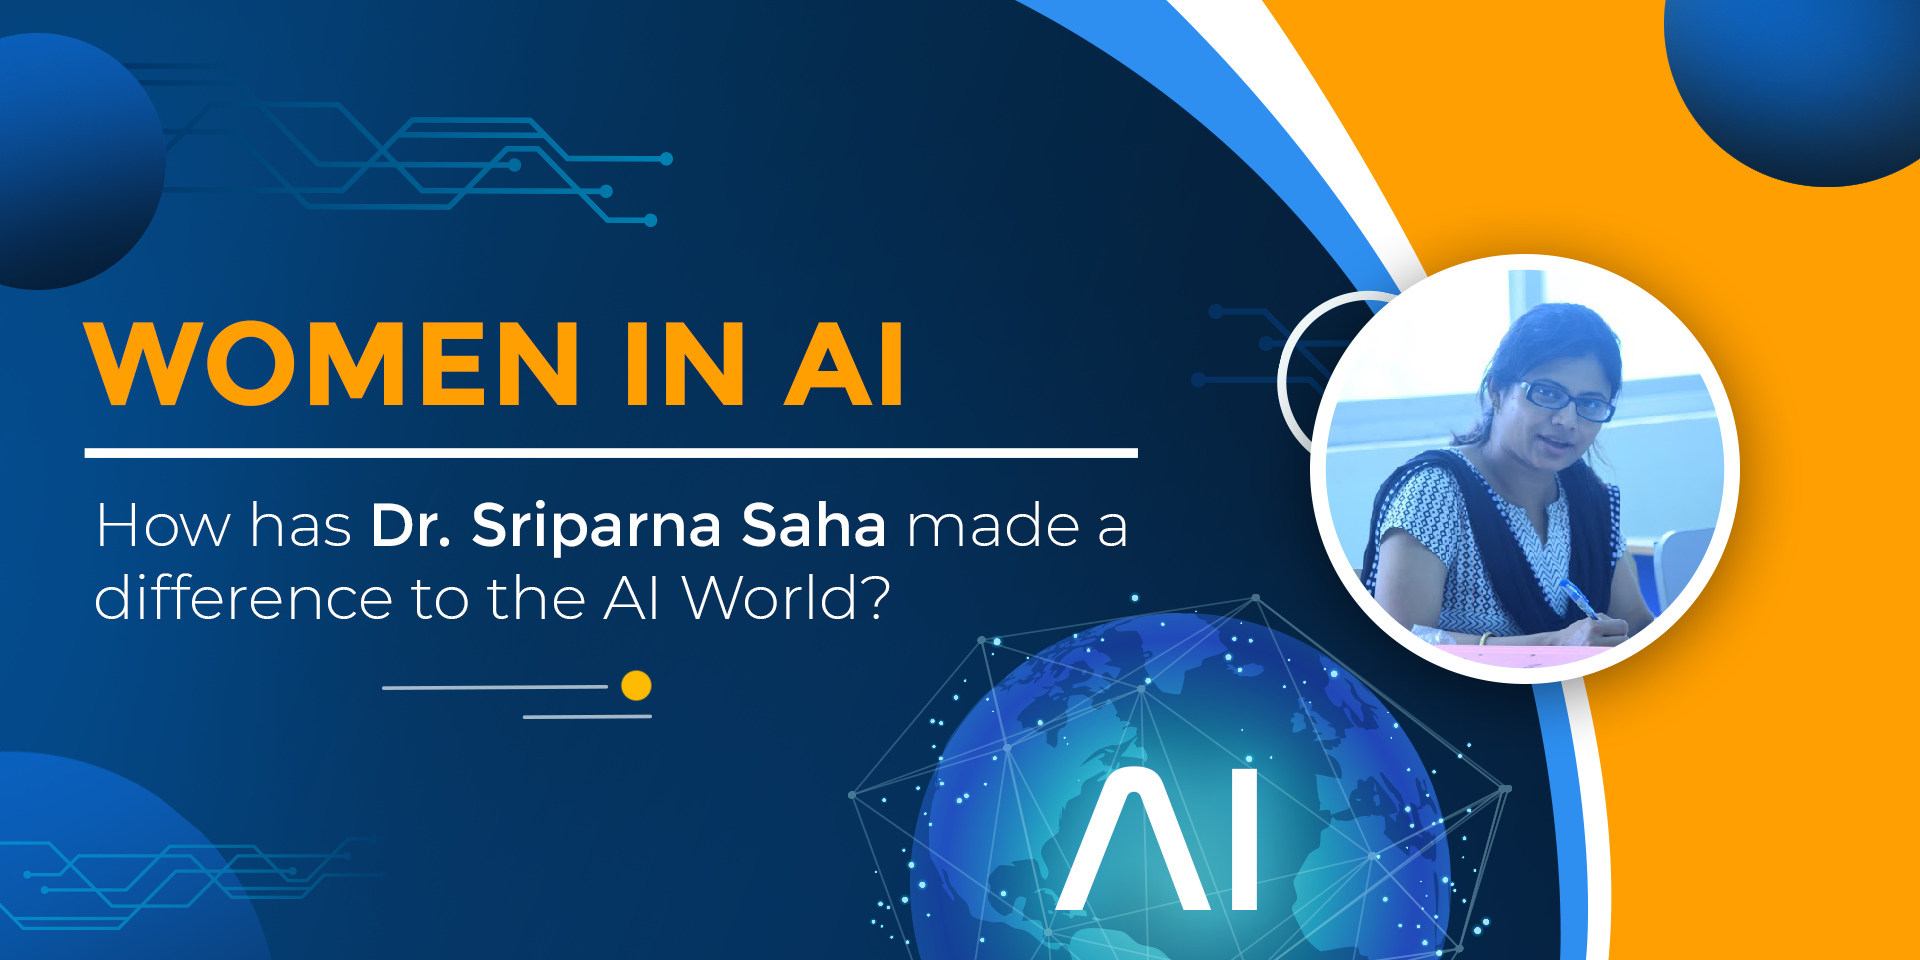 Women in AI - How has Dr. Sriparna Saha Made a Difference to the AI World?